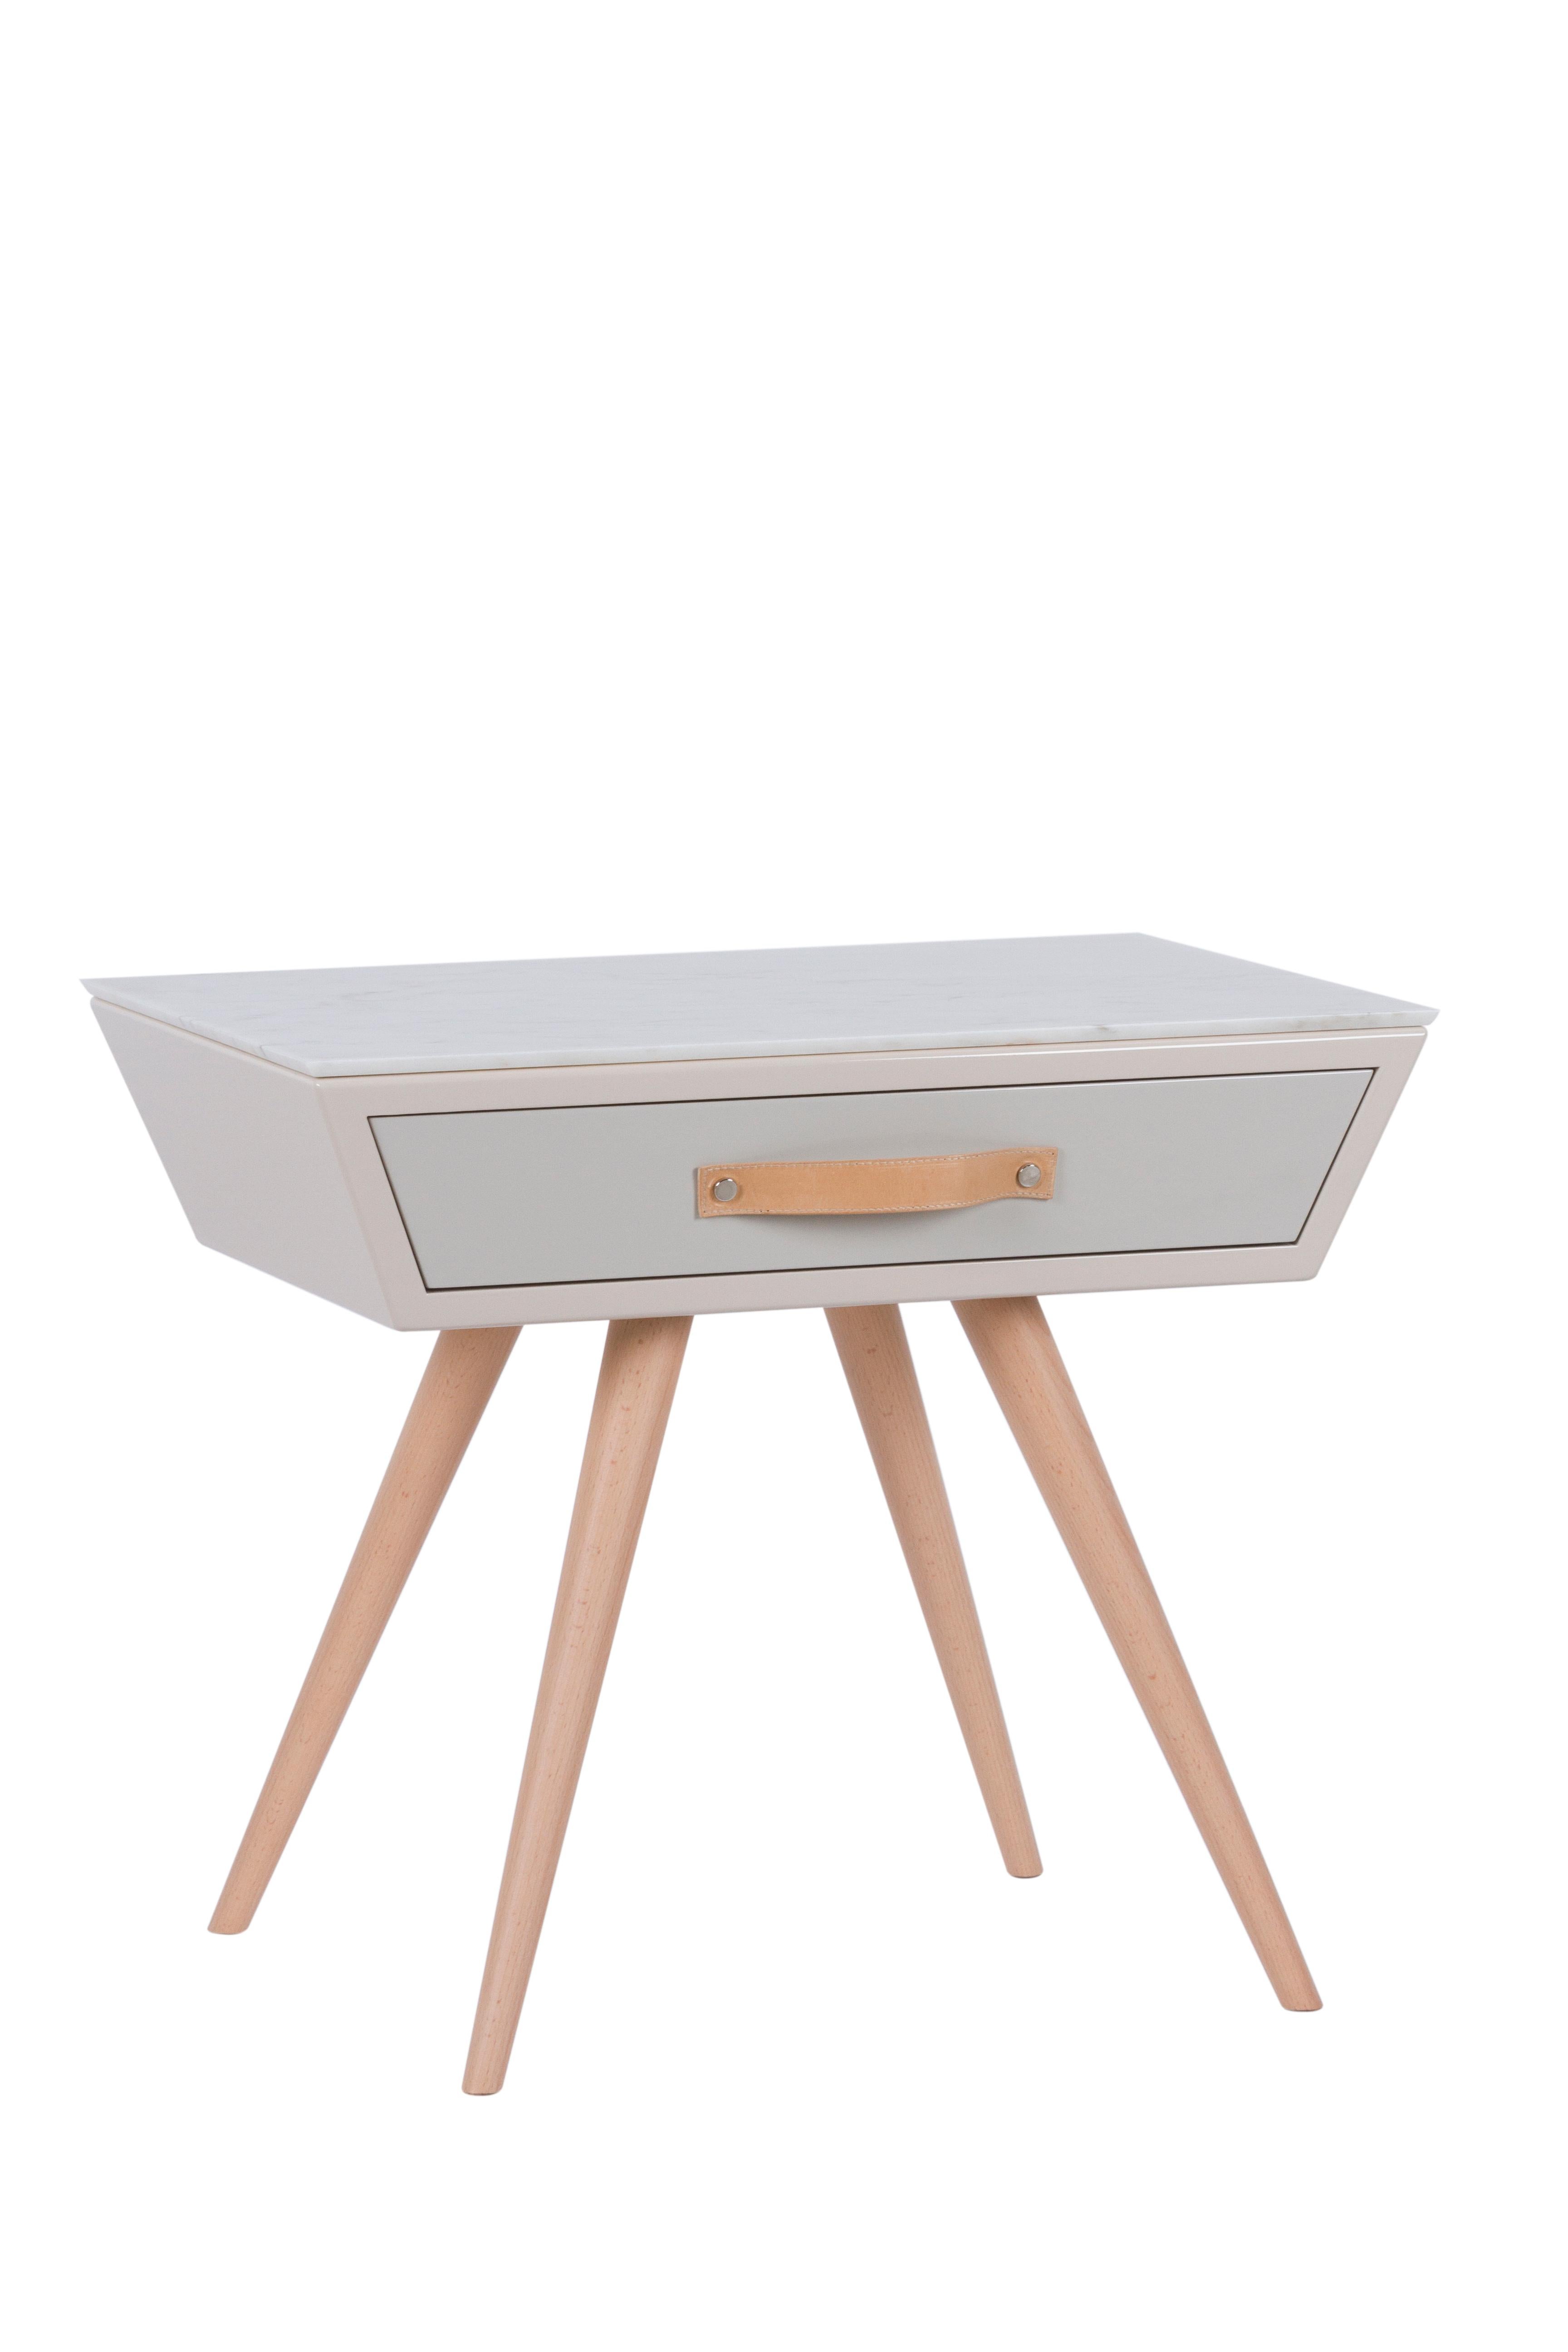 Sopro Nightstand, Modern Collection, Handcrafted in Portugal - Europe by GF Modern.

The Sopro nightstand offers a timeless design for your living area. Sopro is a wooden bedside table with a drawer lacquered in beige and light-grey, with details in